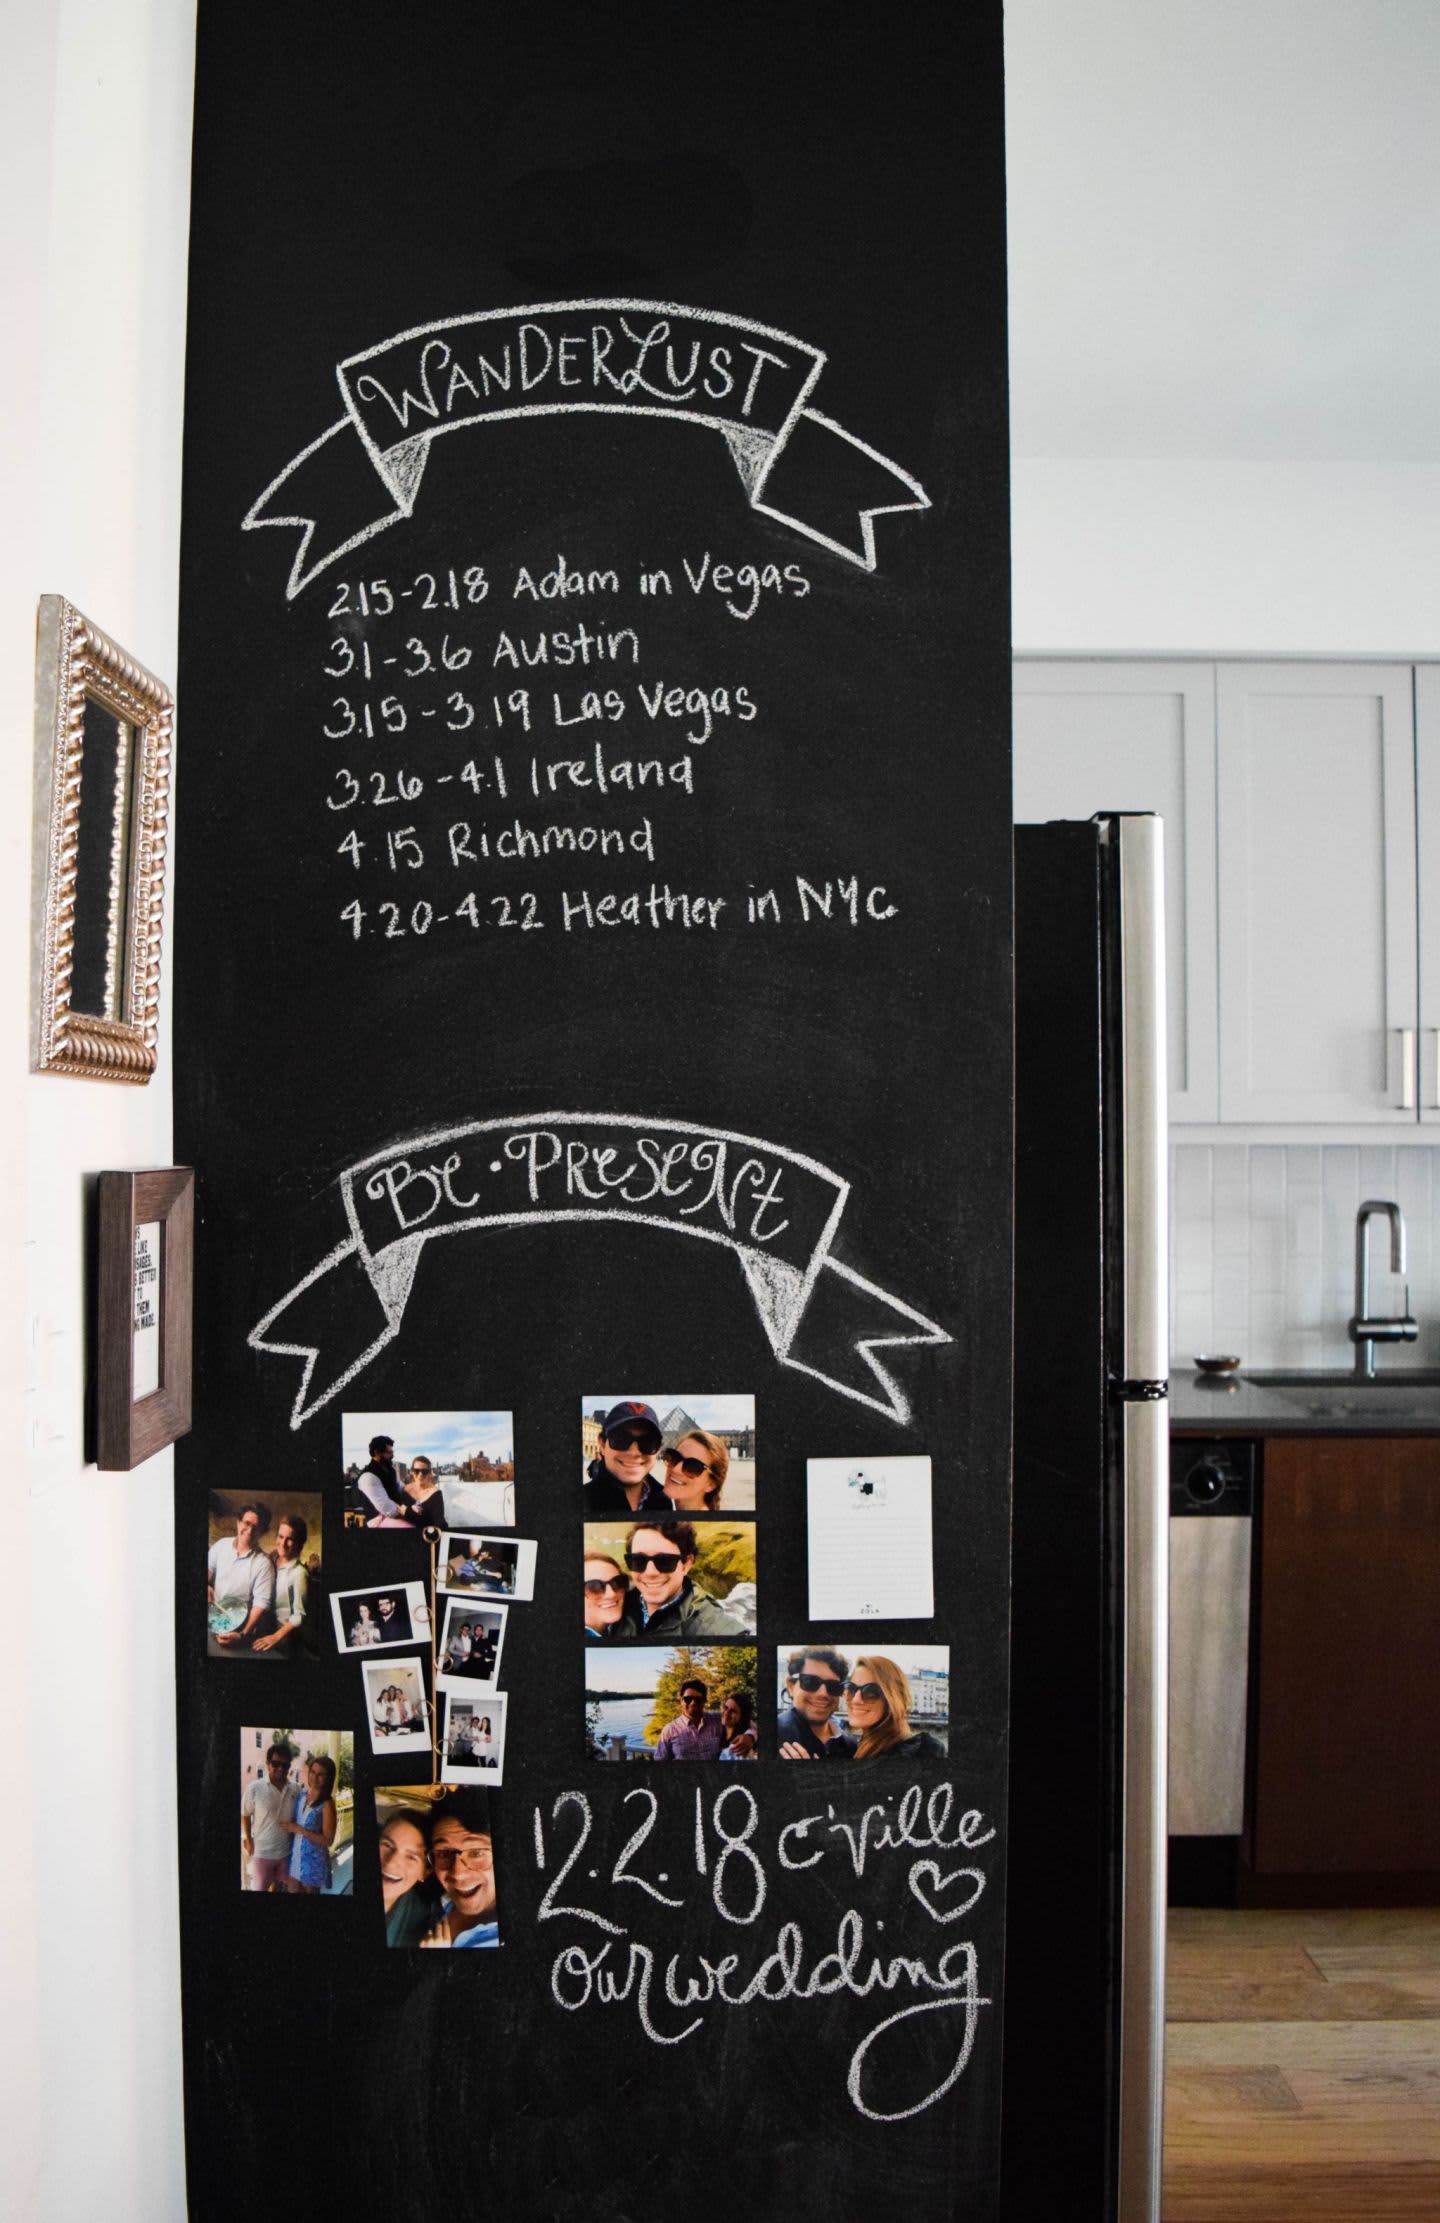 Does Chalkboard Paint for Walls Really Work? Painting Chaulkboard Walls